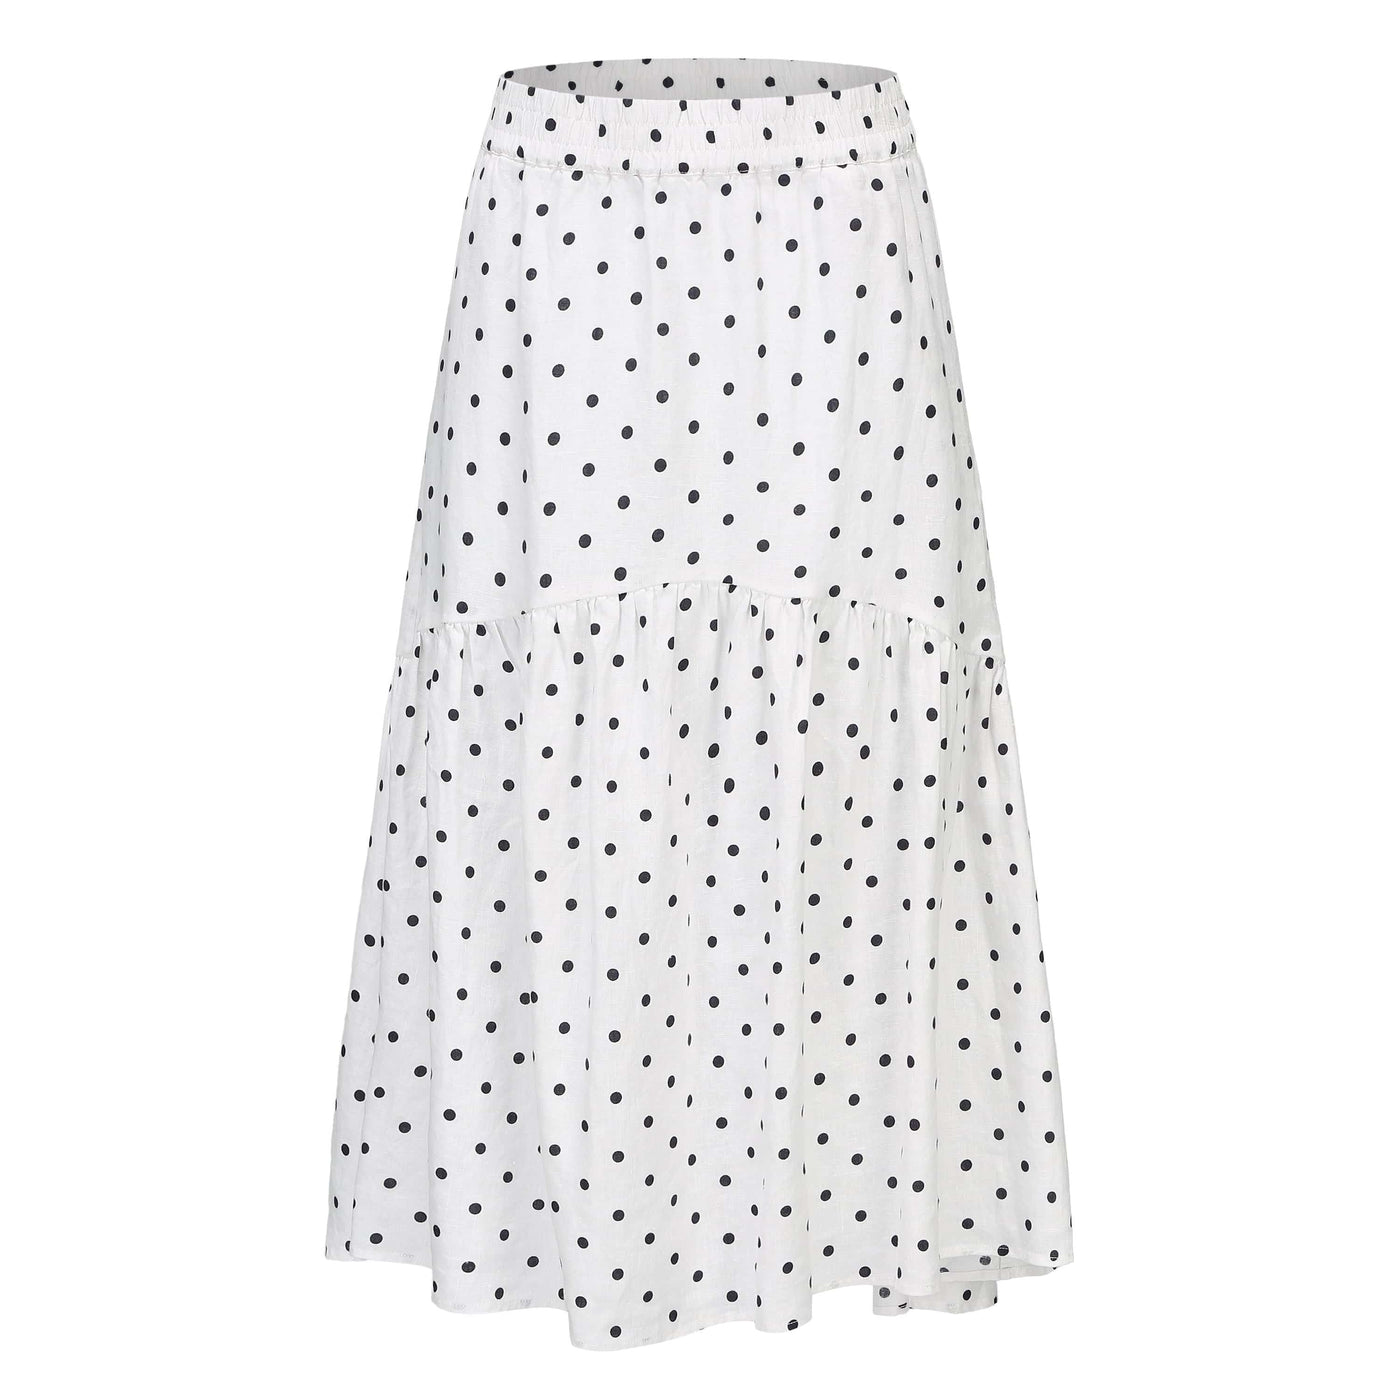 Lilly Pilly Collection 100% organic linen Lola Skirt in Polka Dot as 3D model front view